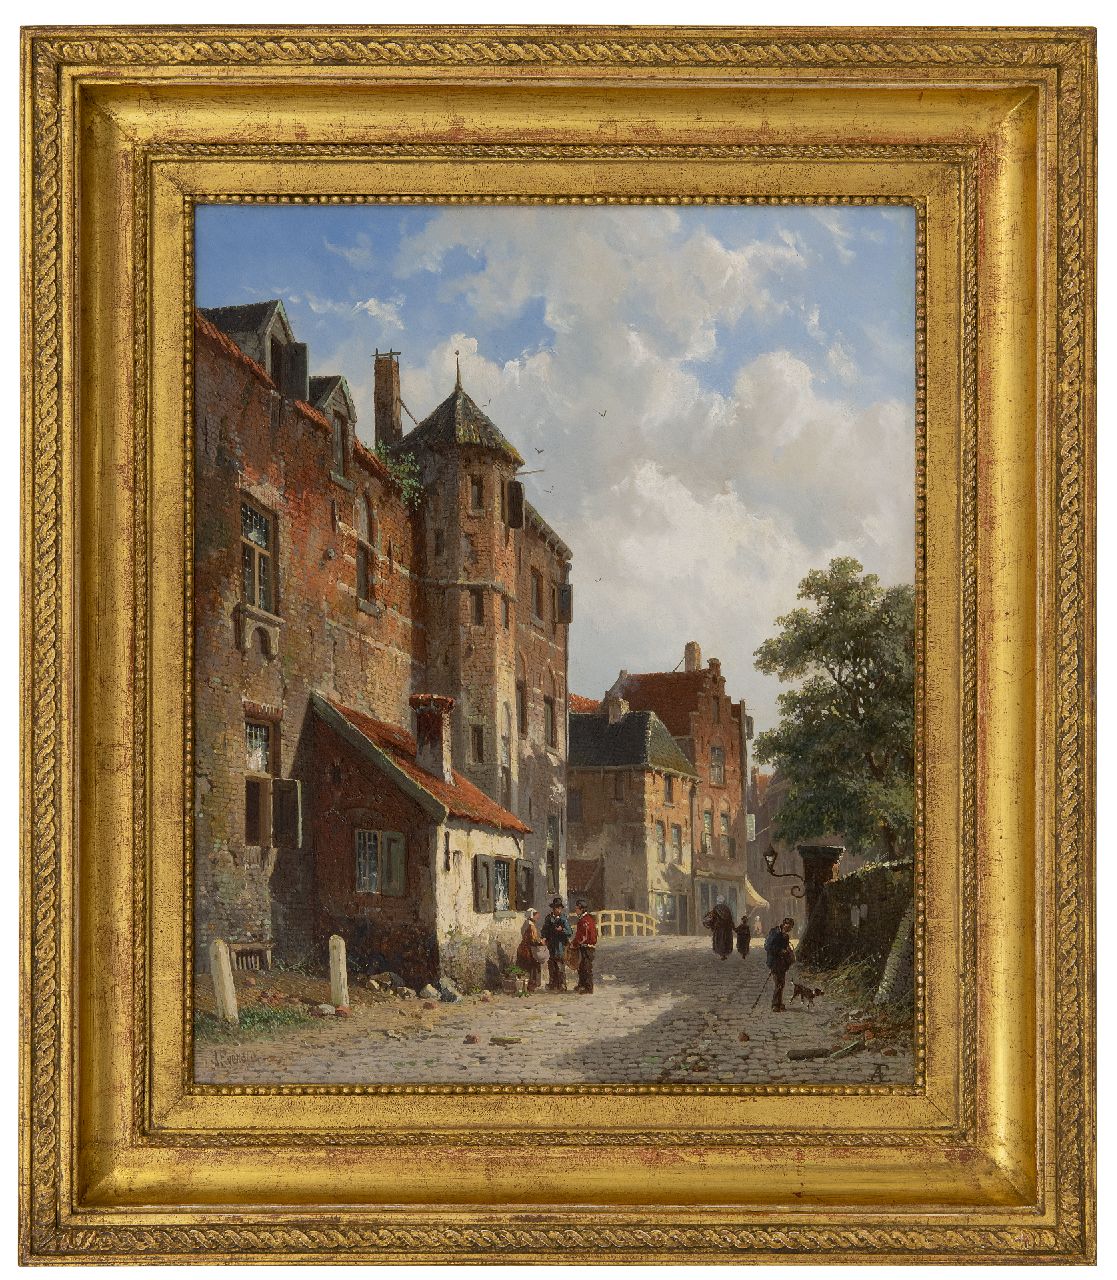 Eversen A.  | Adrianus Eversen, Sunny Dutch street, oil on panel 41.8 x 34.4 cm, signed l.l. in full and l.r. with monogram